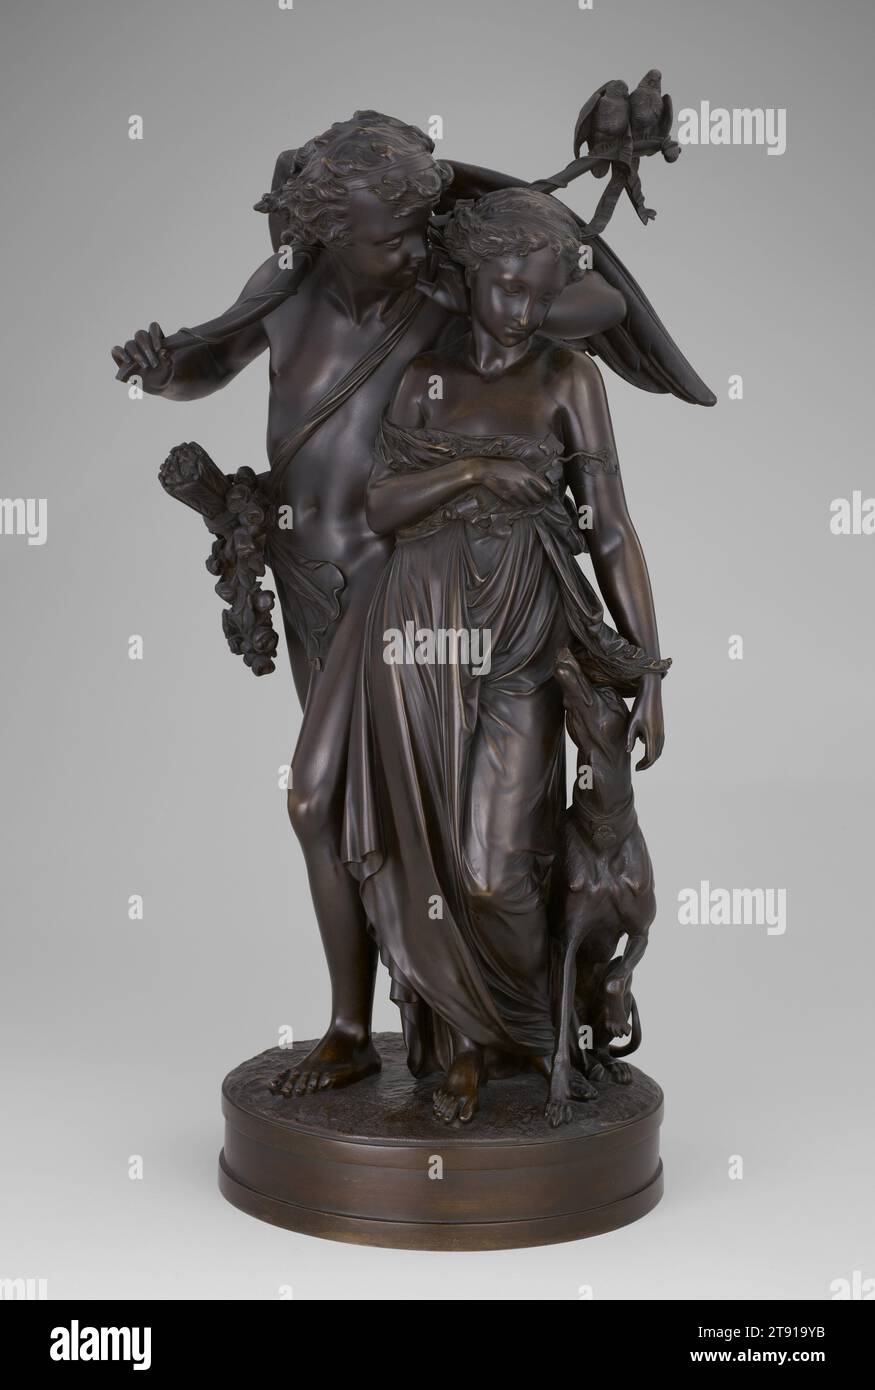 L'Amour et L'Amité, c. 1857, Albert-Ernest Carrier-Belleuse, French, 1824–1887, 30 x 12 in. (76.2 x 30.48 cm), Bronze, France, 19th century, Carrier-Belleuse made his Salon debut in 1850, but it was the exhibition of works such as Love and Friendship at the 1857 Salon that gained the sculptor recognition. The allegorical pairing of Love and Friendship first became popular in the 1750s under Madame de Pompadour's patronage, but fell out of fashion by the end of the 18th century. At a time when Rococo themes and styles were once again en vogue, Carrier-Belleuse reintroduced this subject. Stock Photo